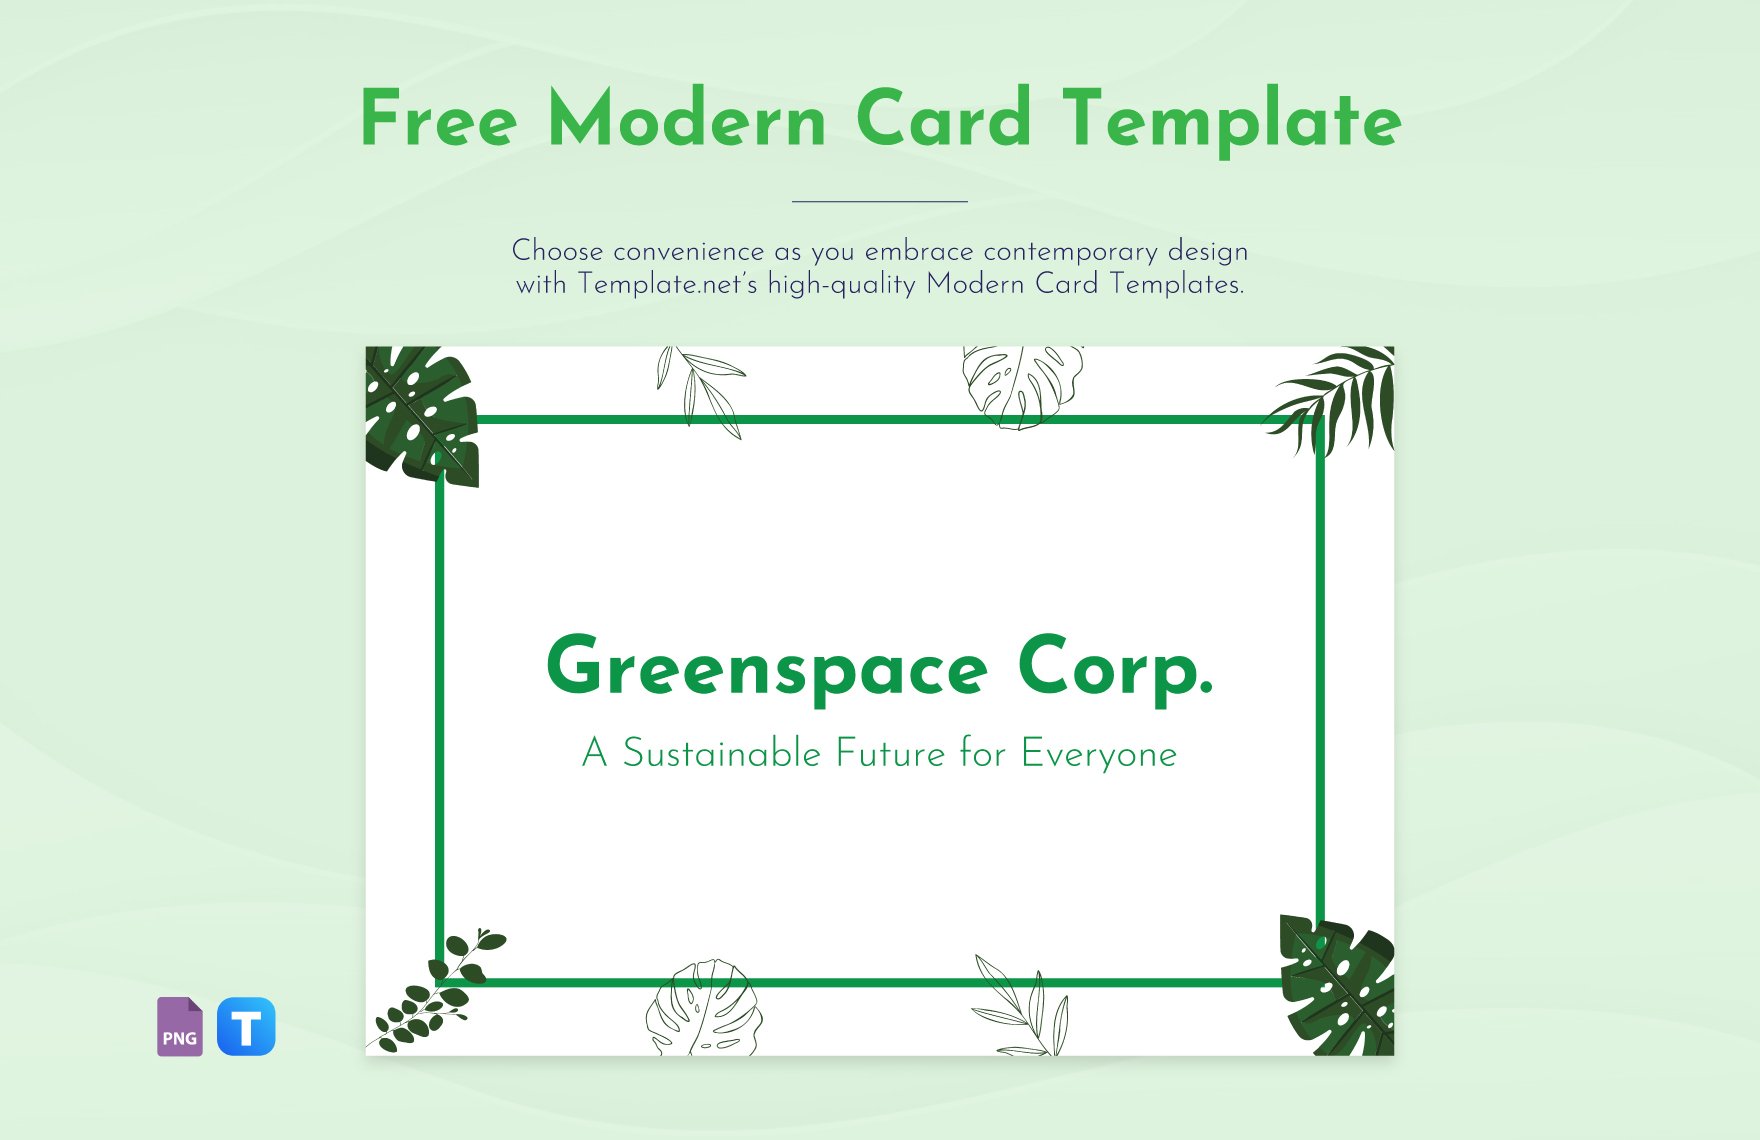 Free Modern Card Template in PNG